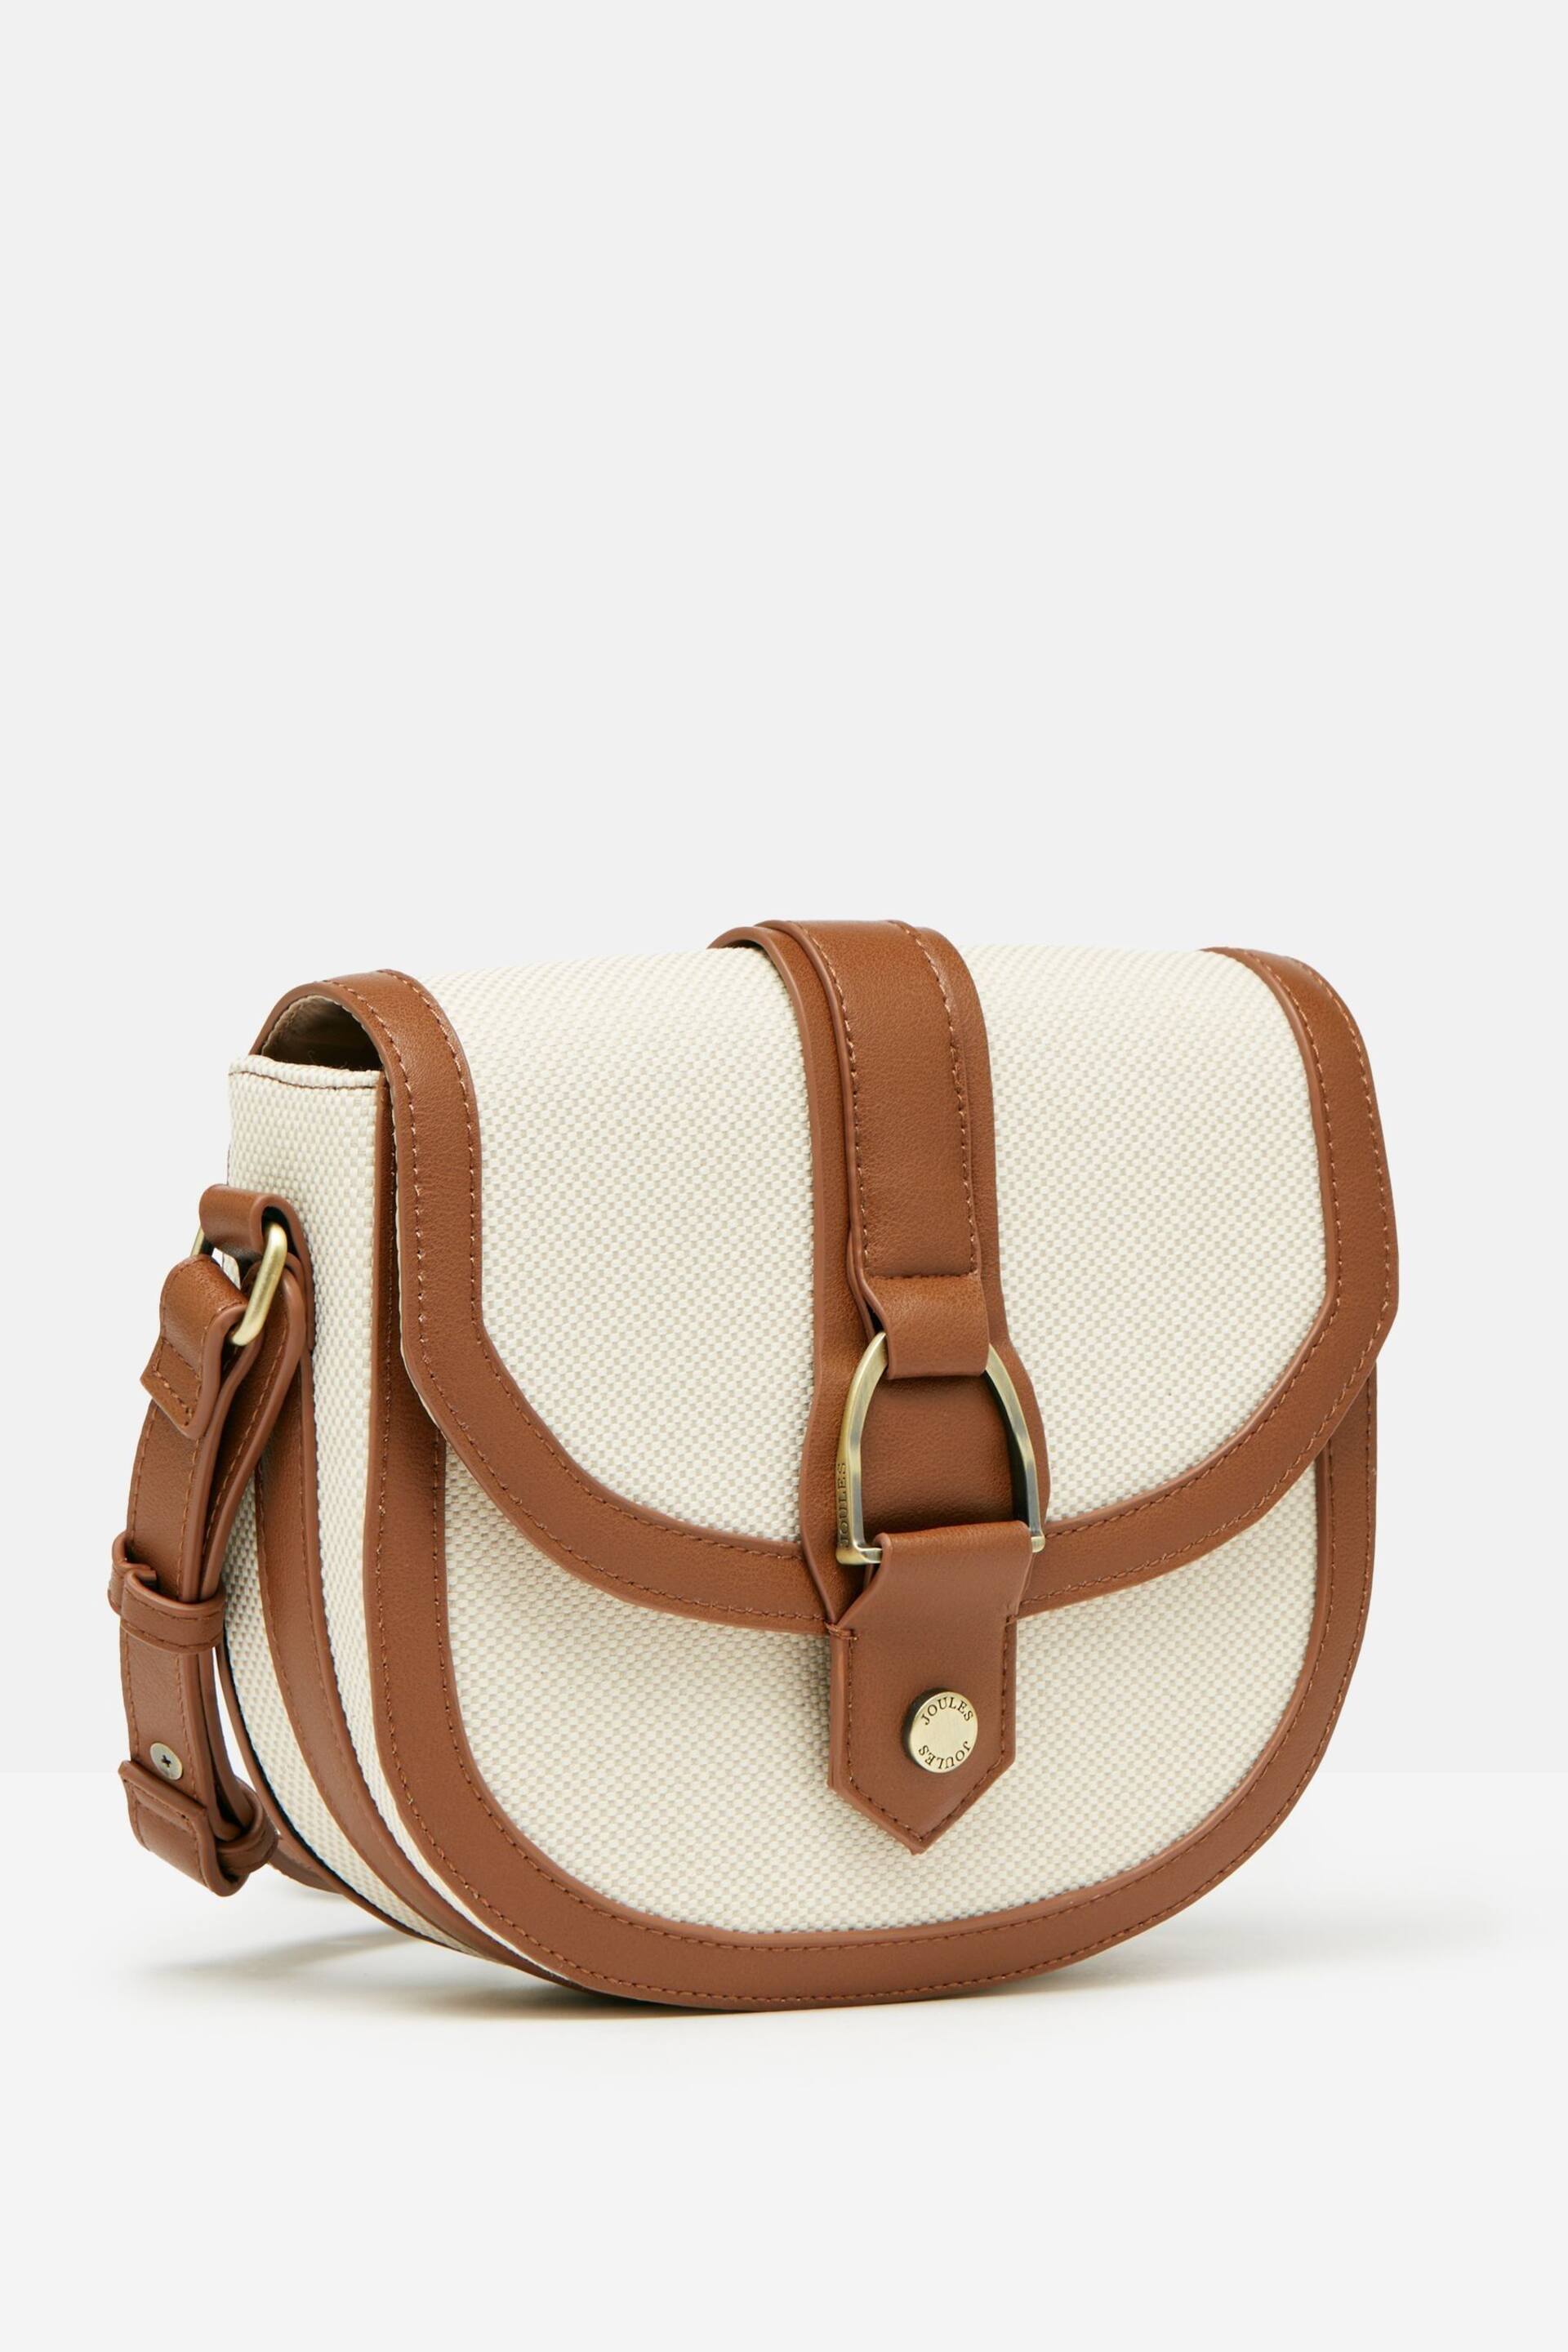 Joules Ludlow Tan Canvas Cross Body Bag - Image 6 of 9